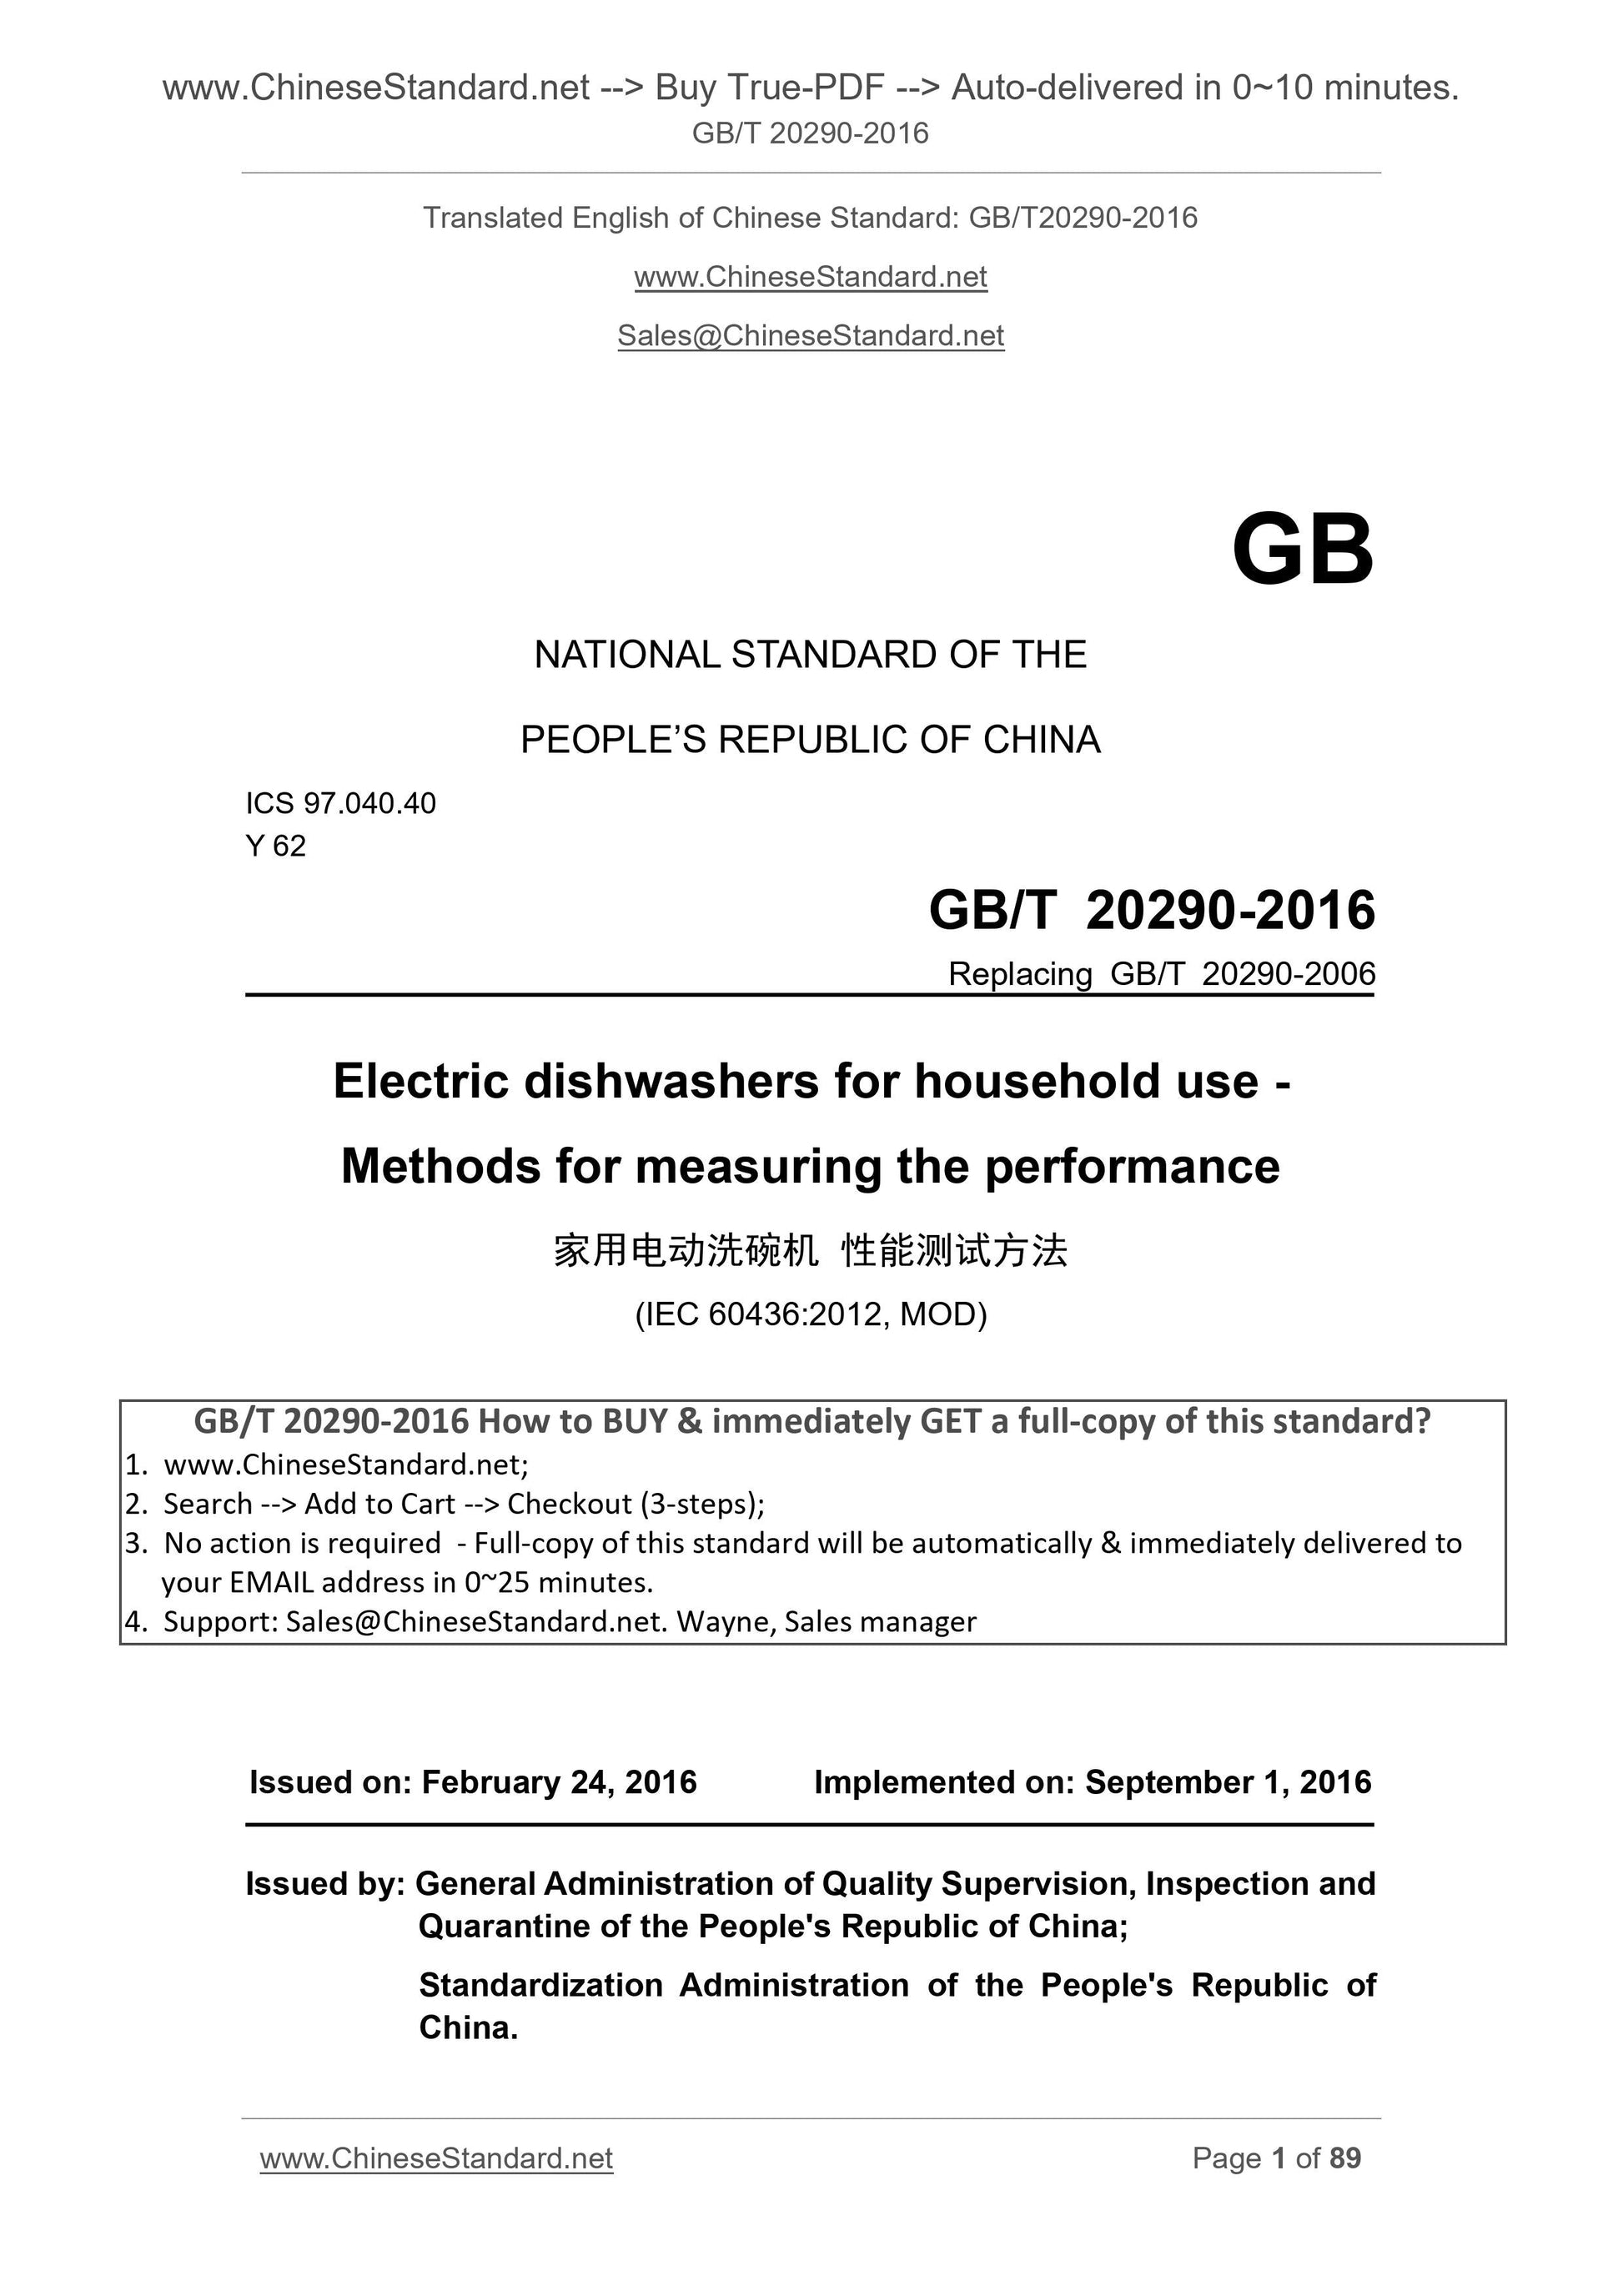 GB/T 20290-2016 Page 1